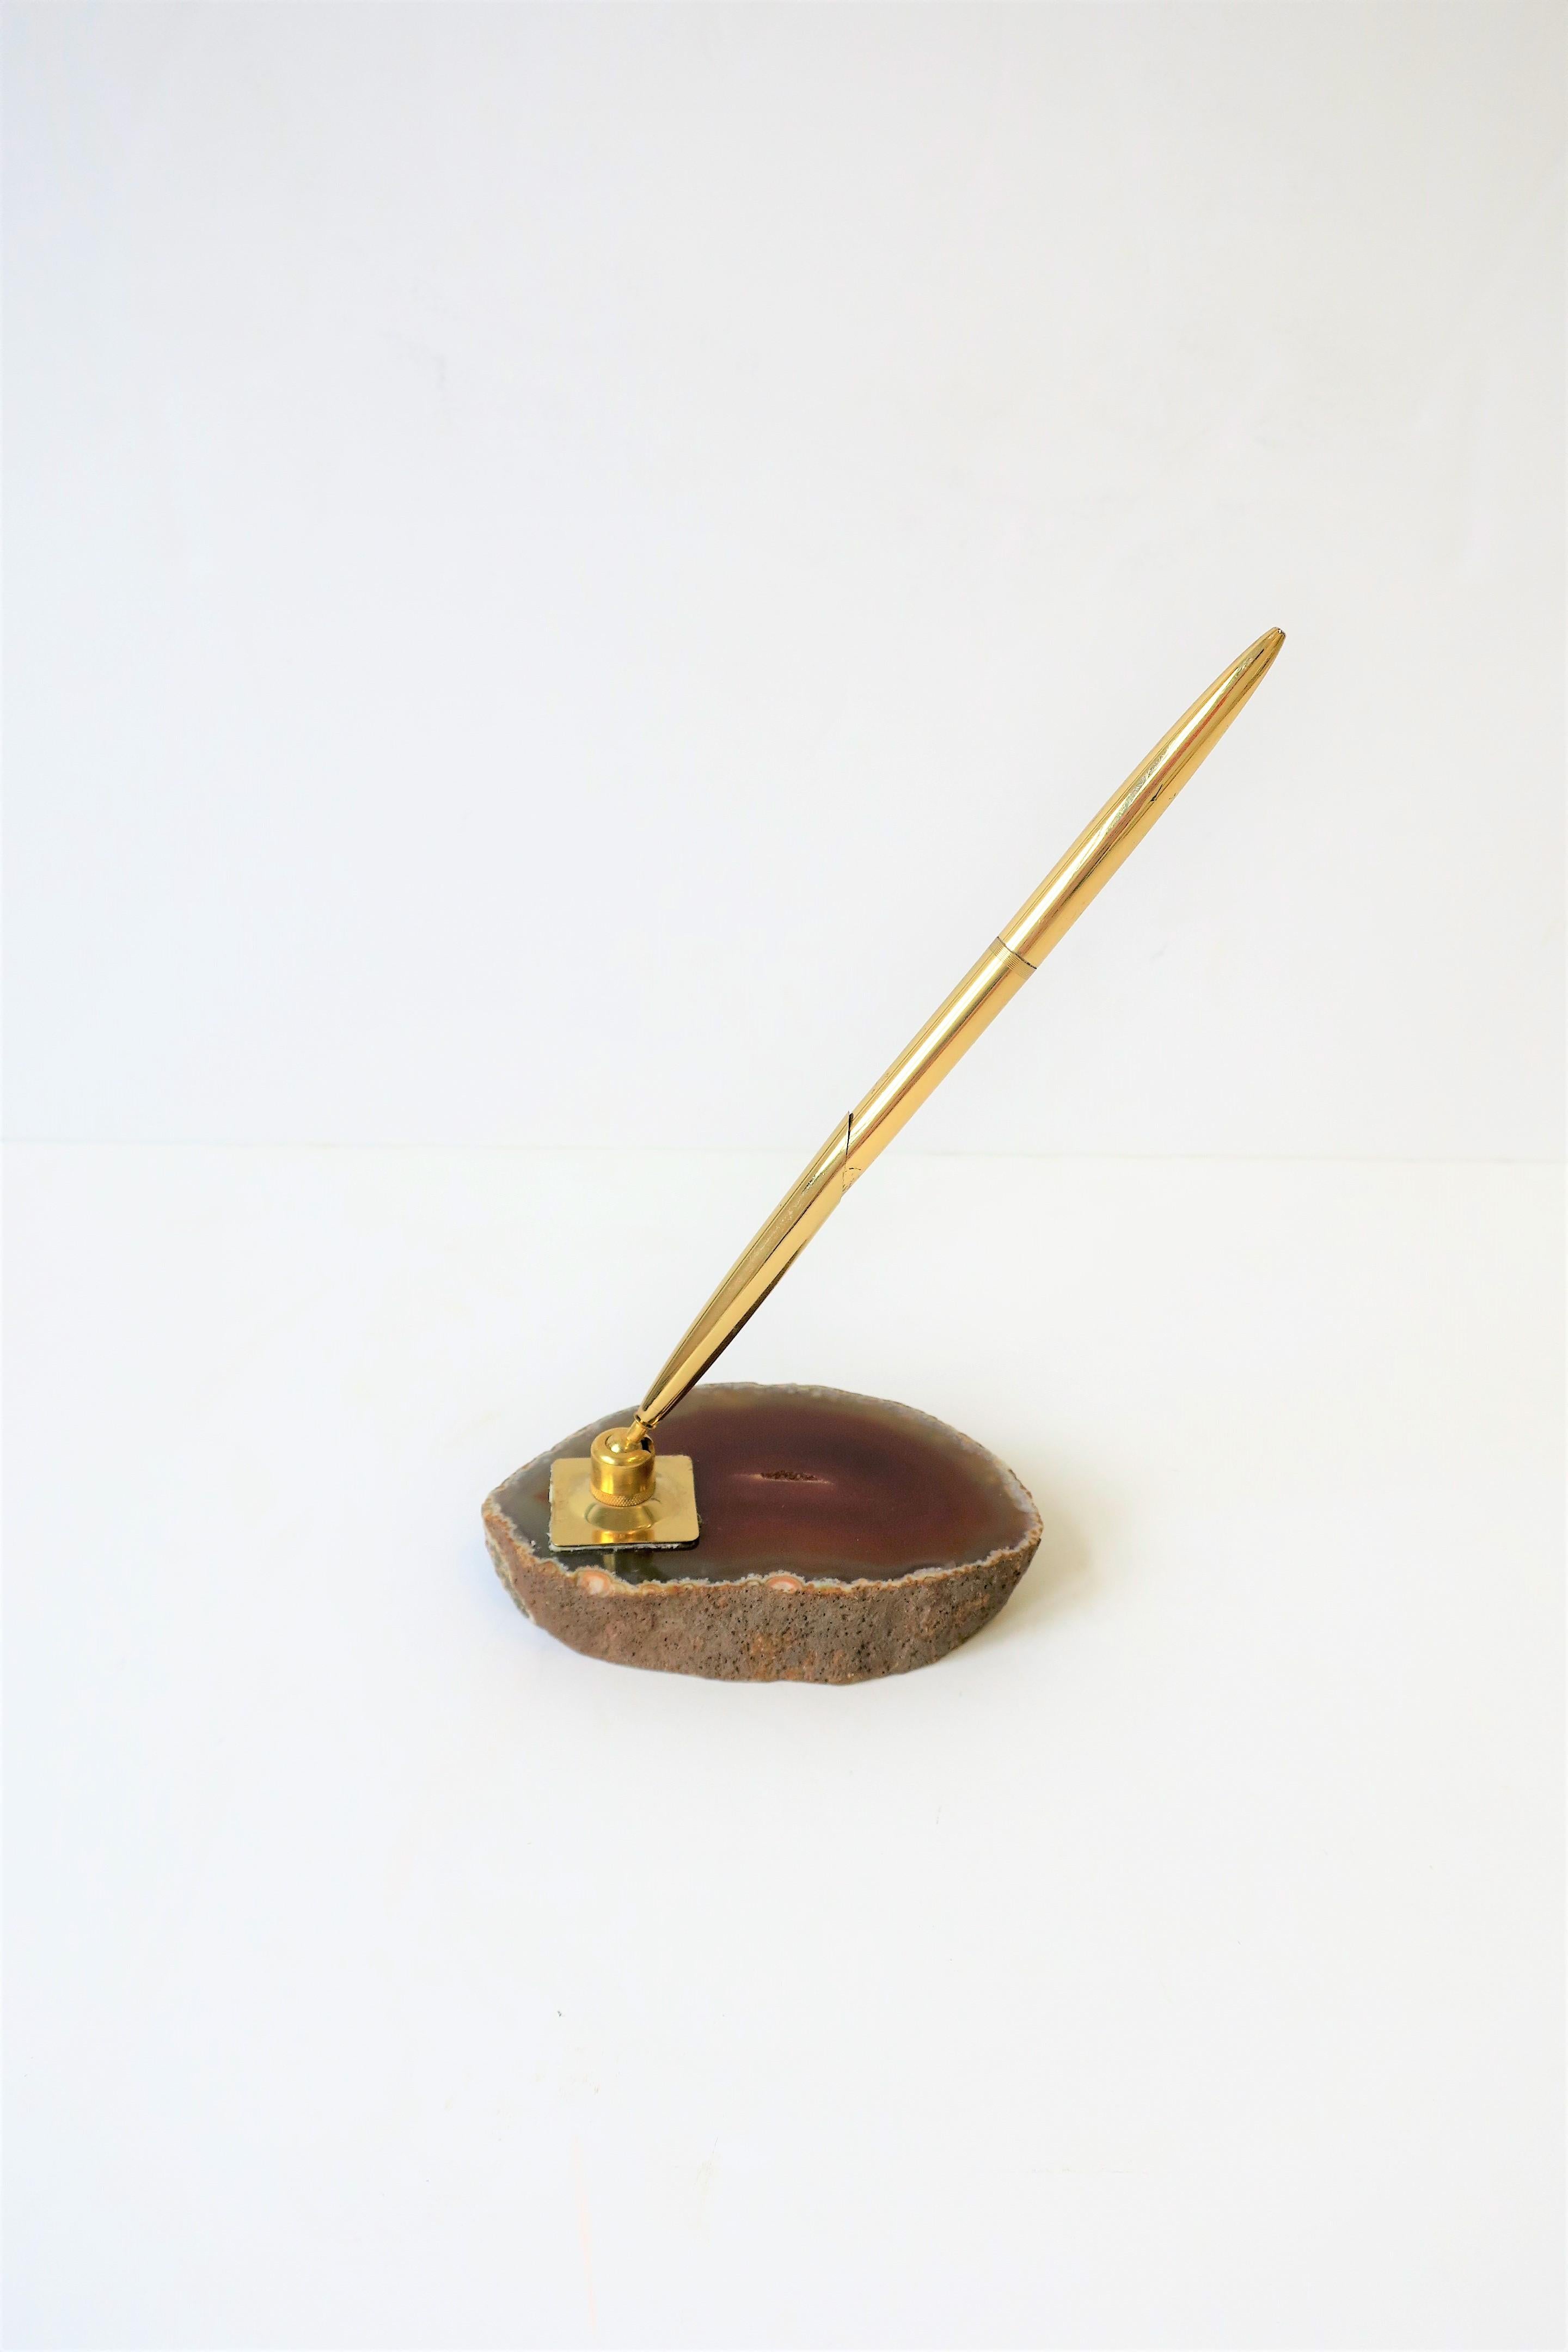 Agate Onyx and Brass Desk Pen Holder, circa 1970s For Sale 3